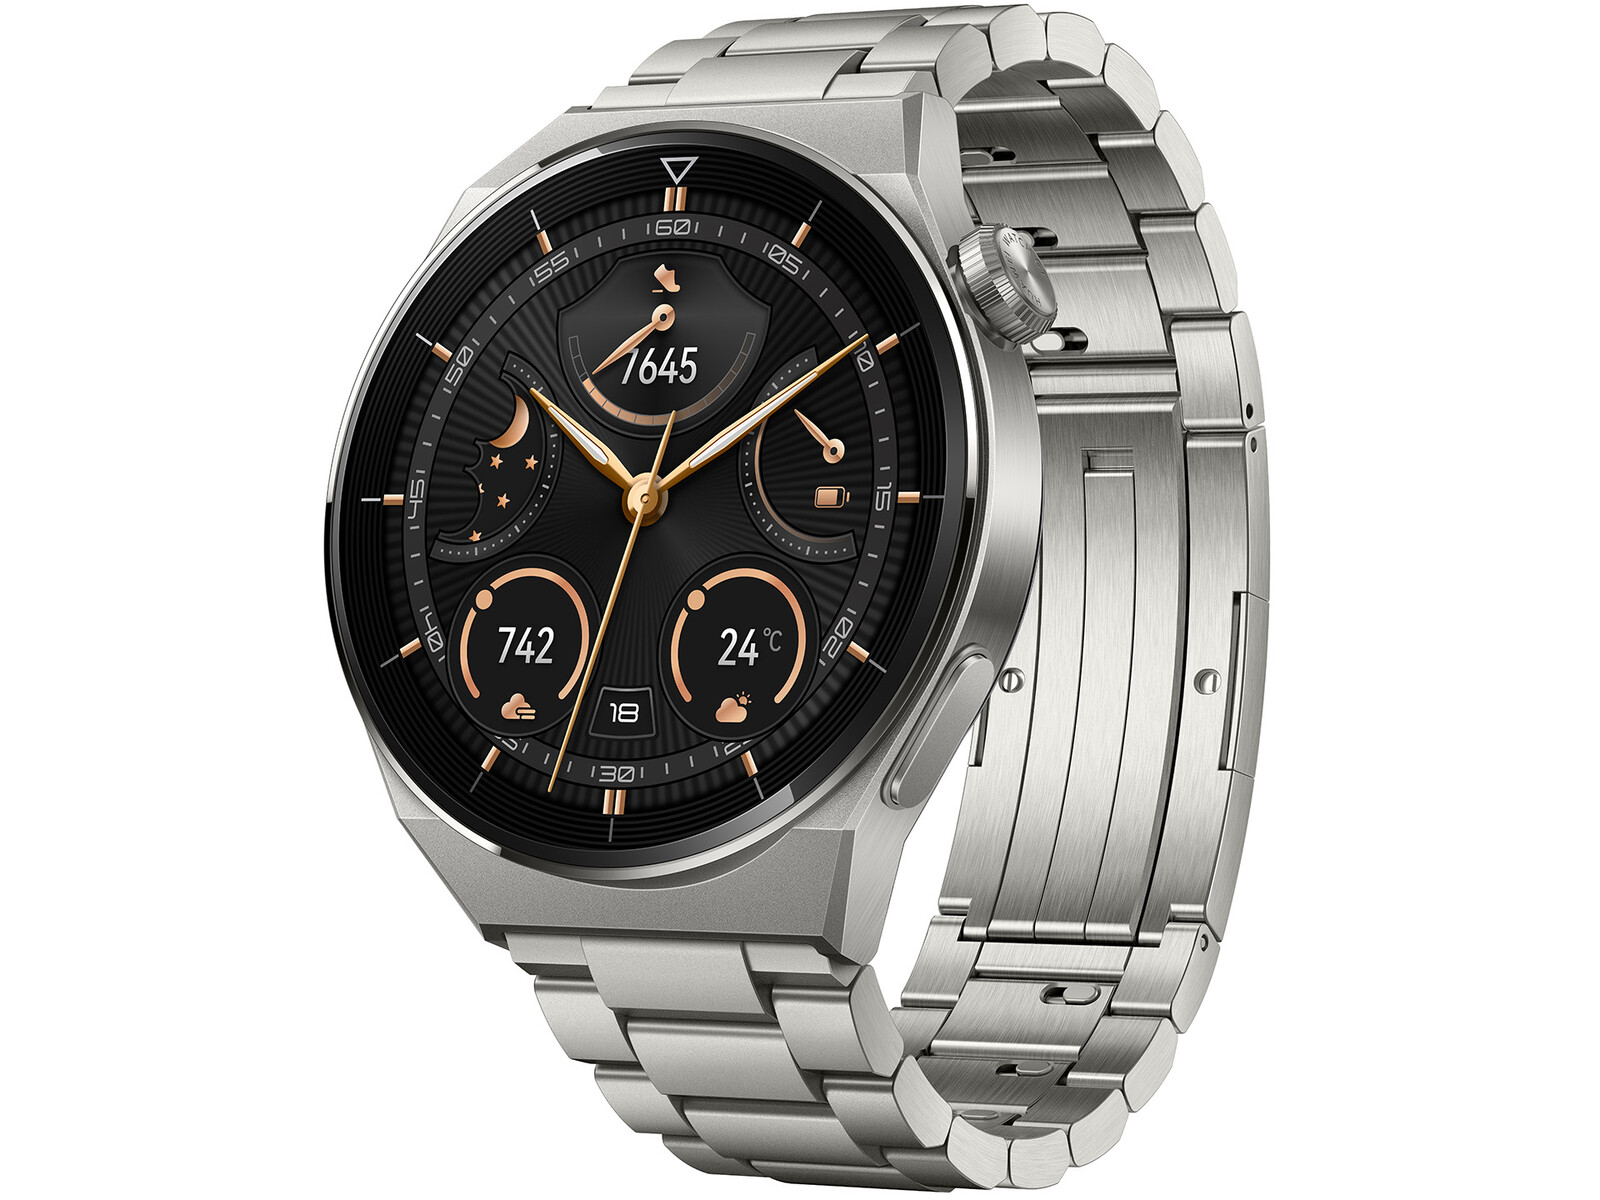 Huawei Watch GT 2 Pro Review: Titanium Smartwatch With Great Battery Life